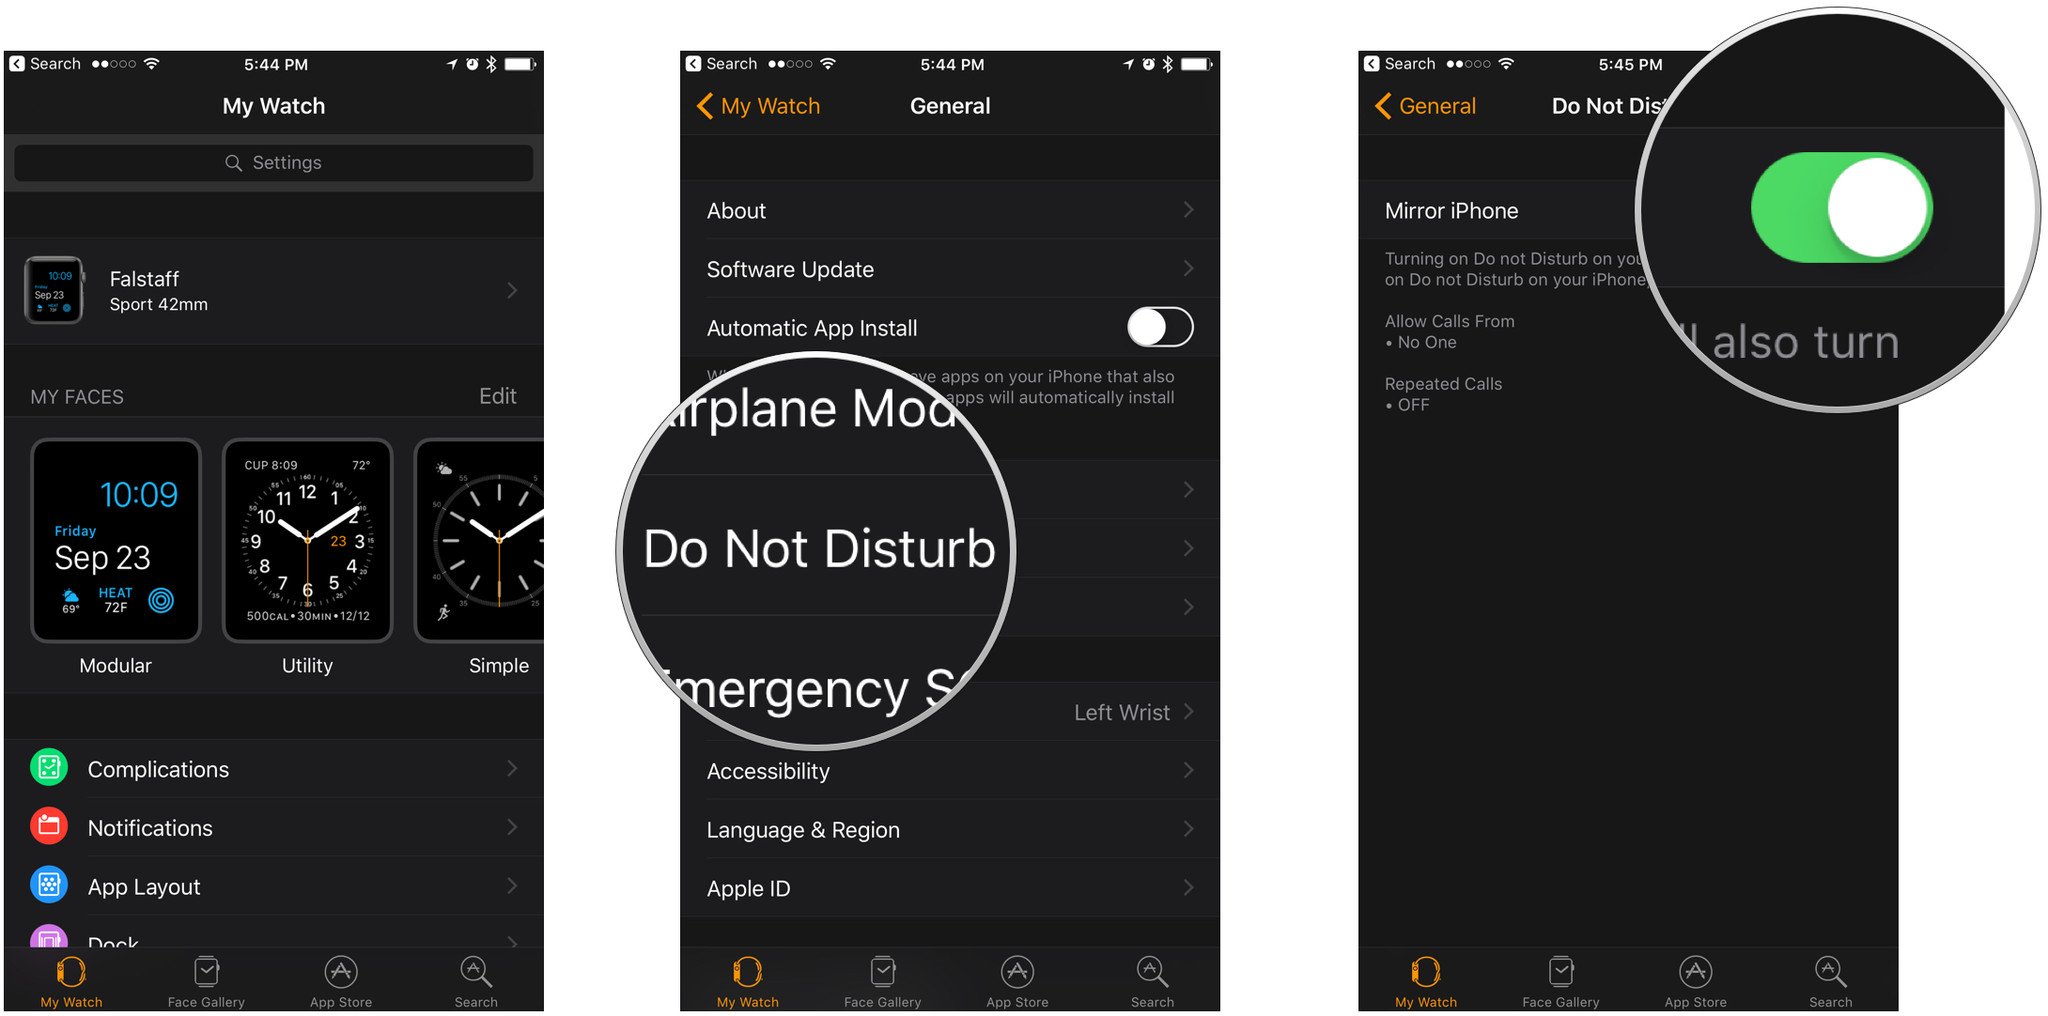 To set up Do Not Disturb on the Apple Watch App for iPhone, launch the Apple Watch app, scroll down, tap General., then Do Not Disturb. Toggle Mirror iPhone to On. 